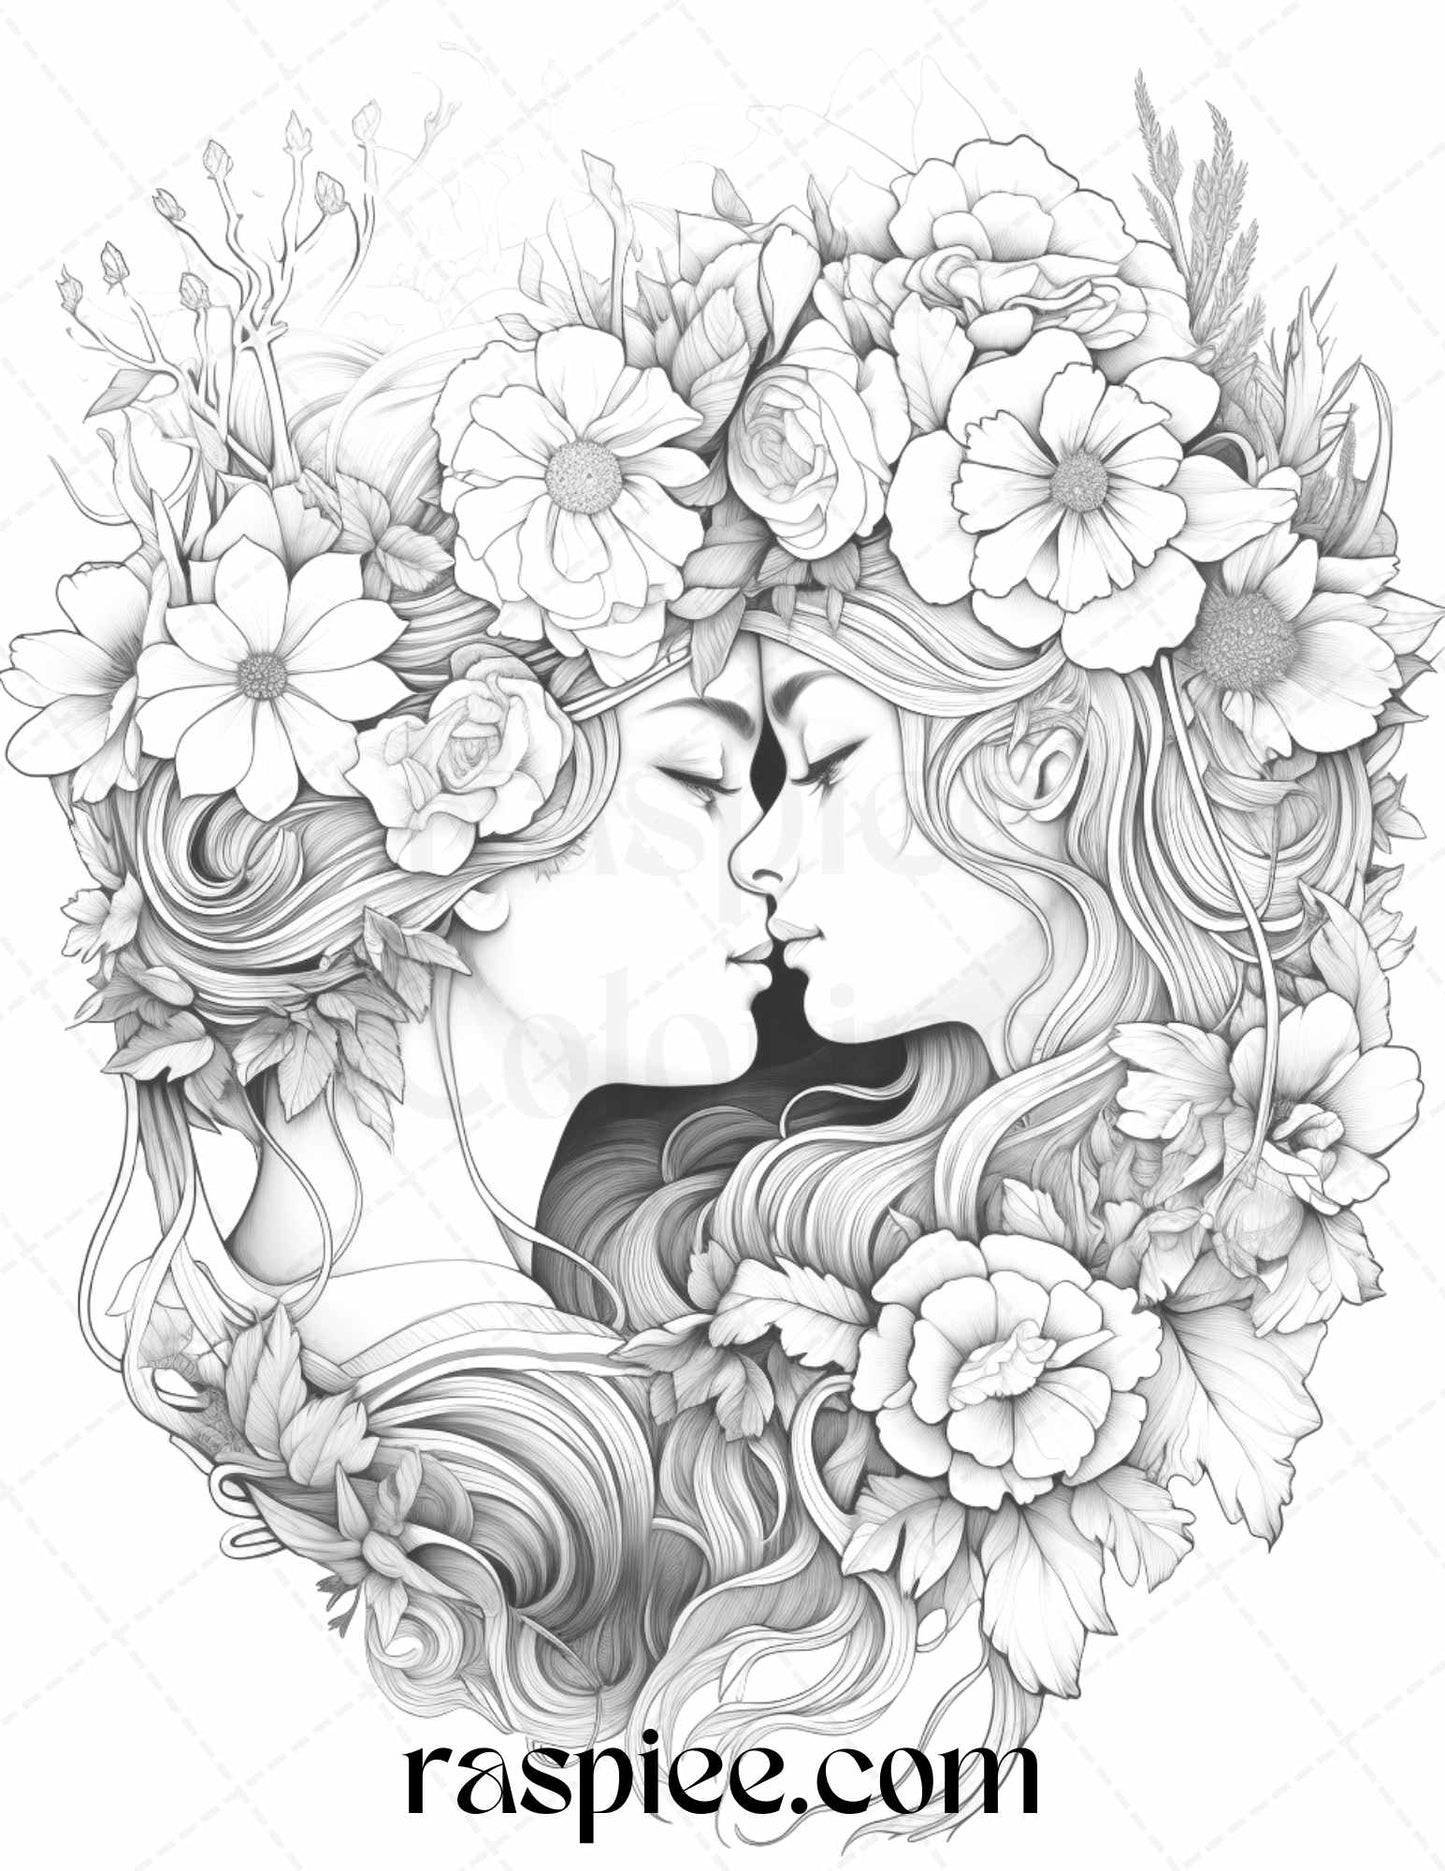 Romantic Couple Flowers Grayscale Coloring Pages for Adults, Floral Illustrations in High-Quality Grayscale Prints, Relationship Coloring Book for Stress Relief, Flowers and Couples Coloring Bundle, Adult Coloring Pages with Romantic Themes, Printable Love Coloring Decorations